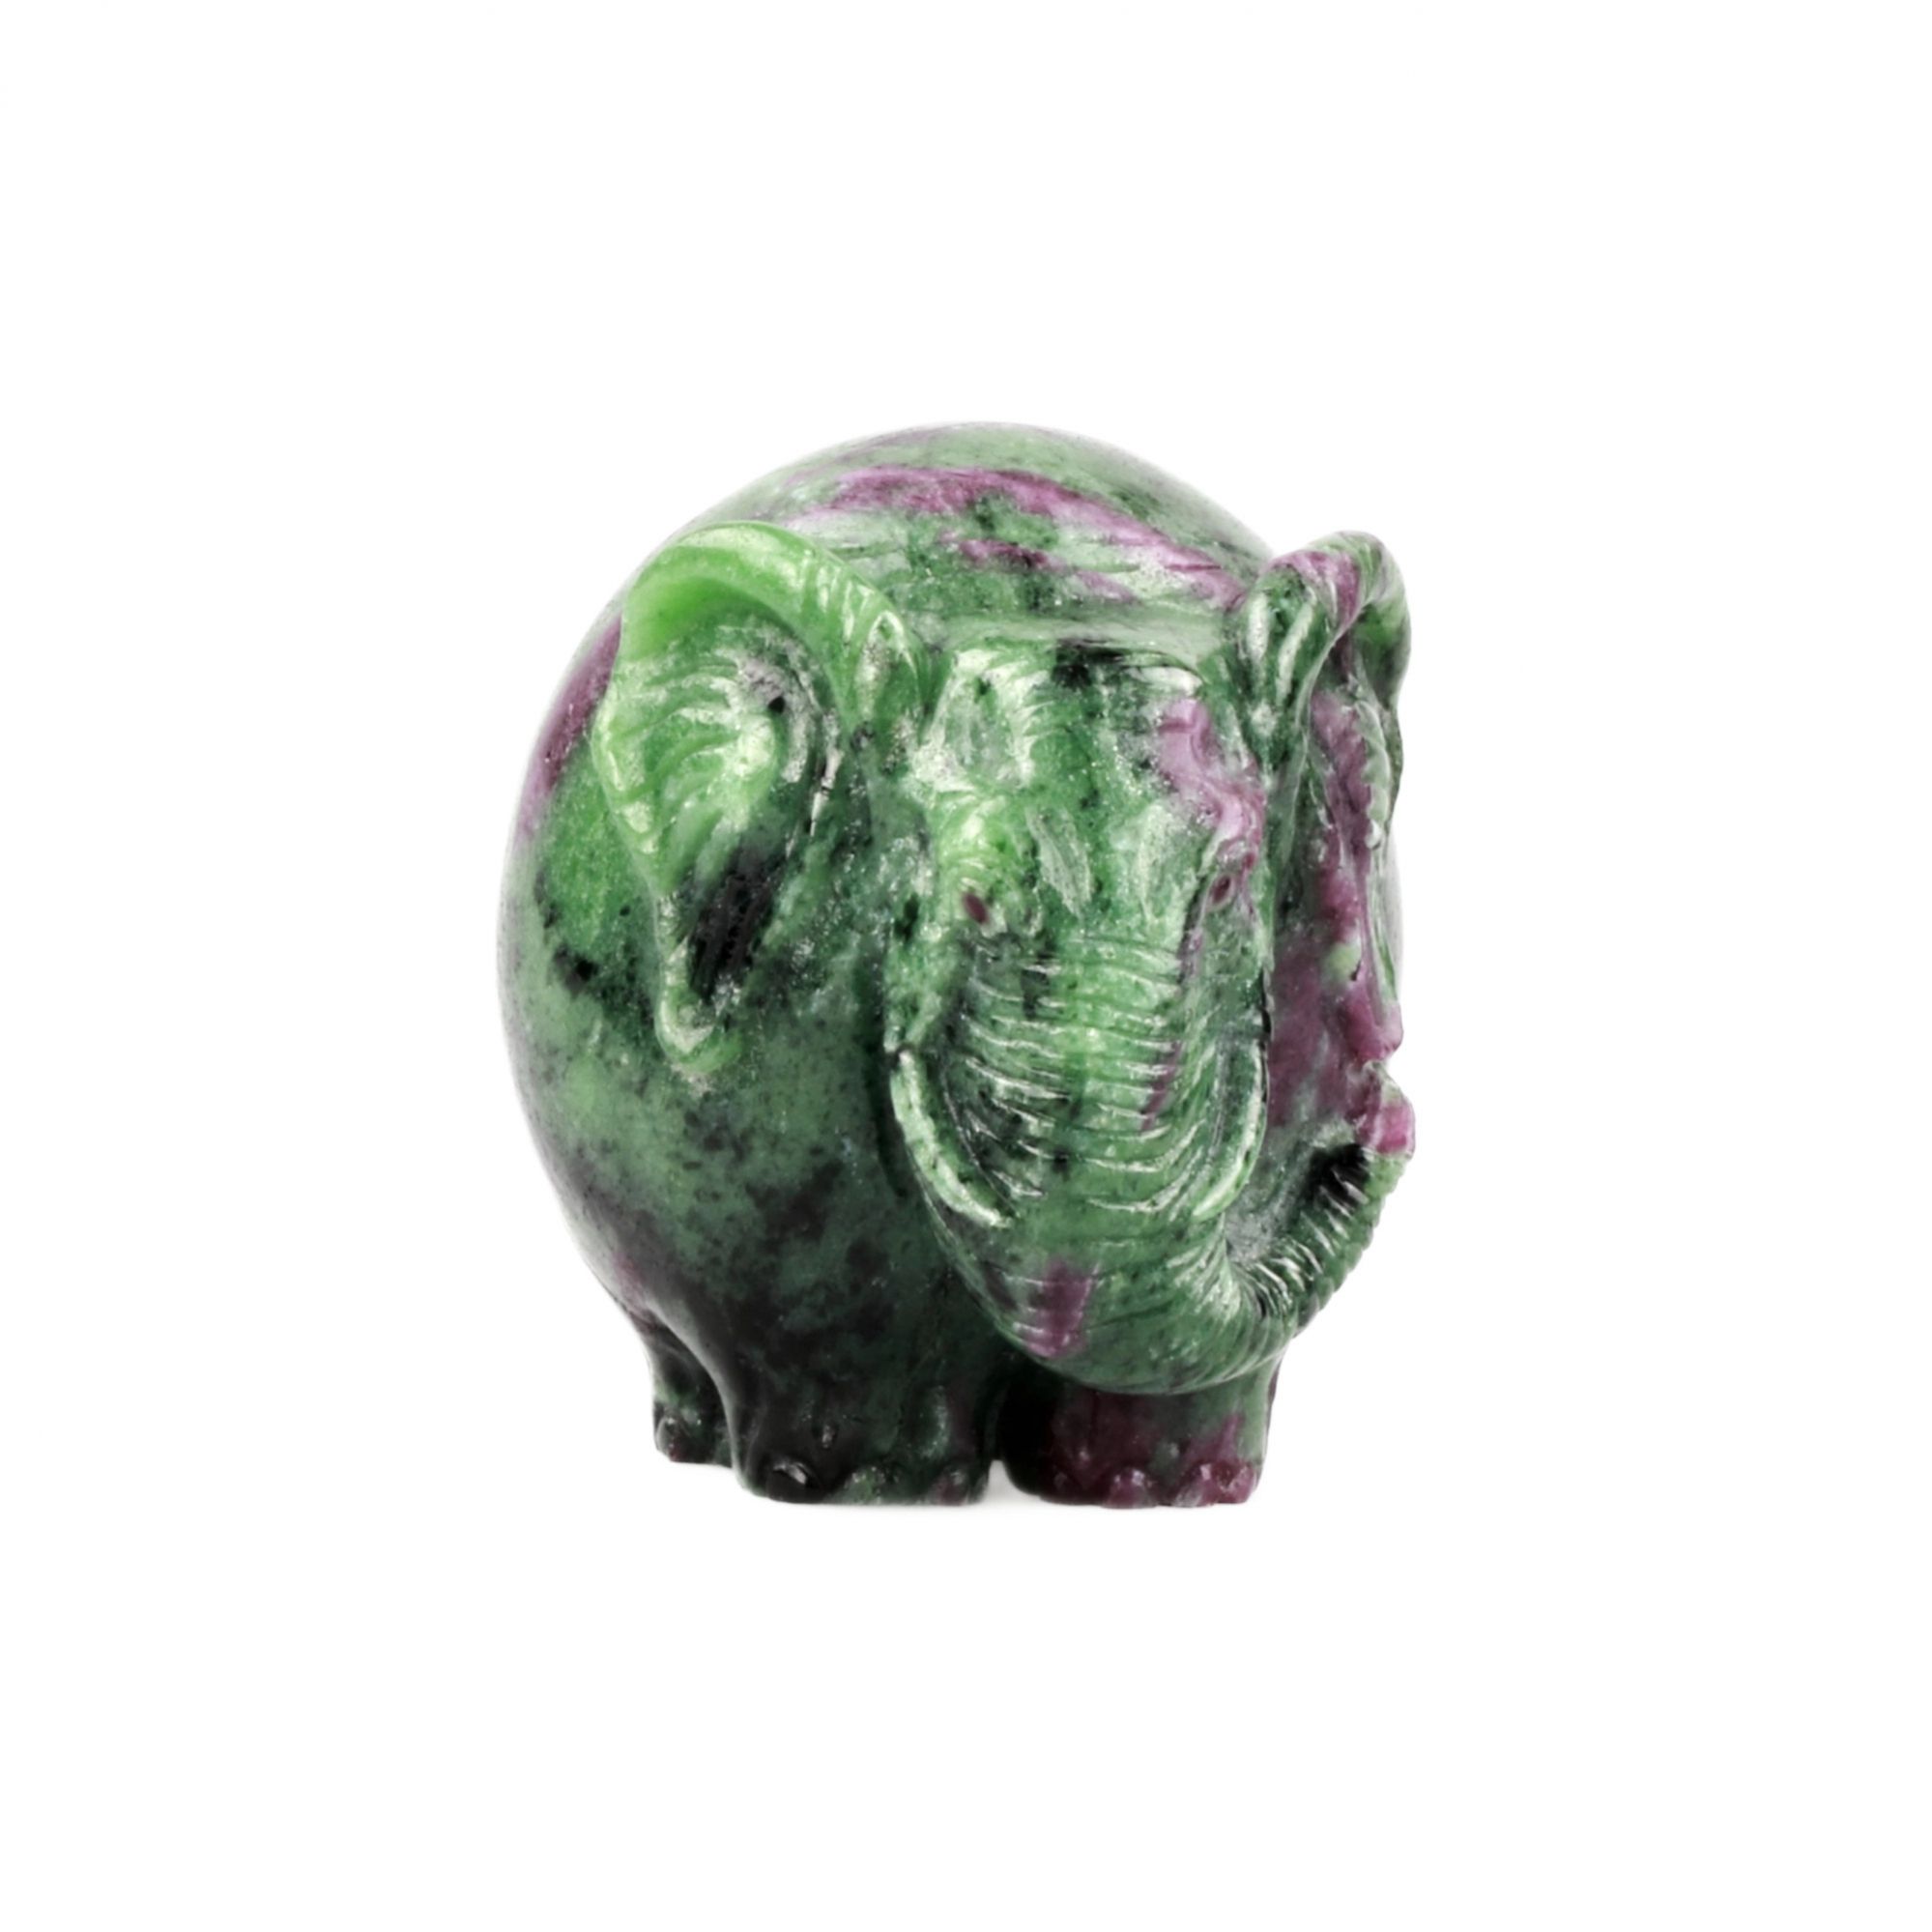 Carved figurine of an elephant in Faberge style. 20th century - Image 2 of 6